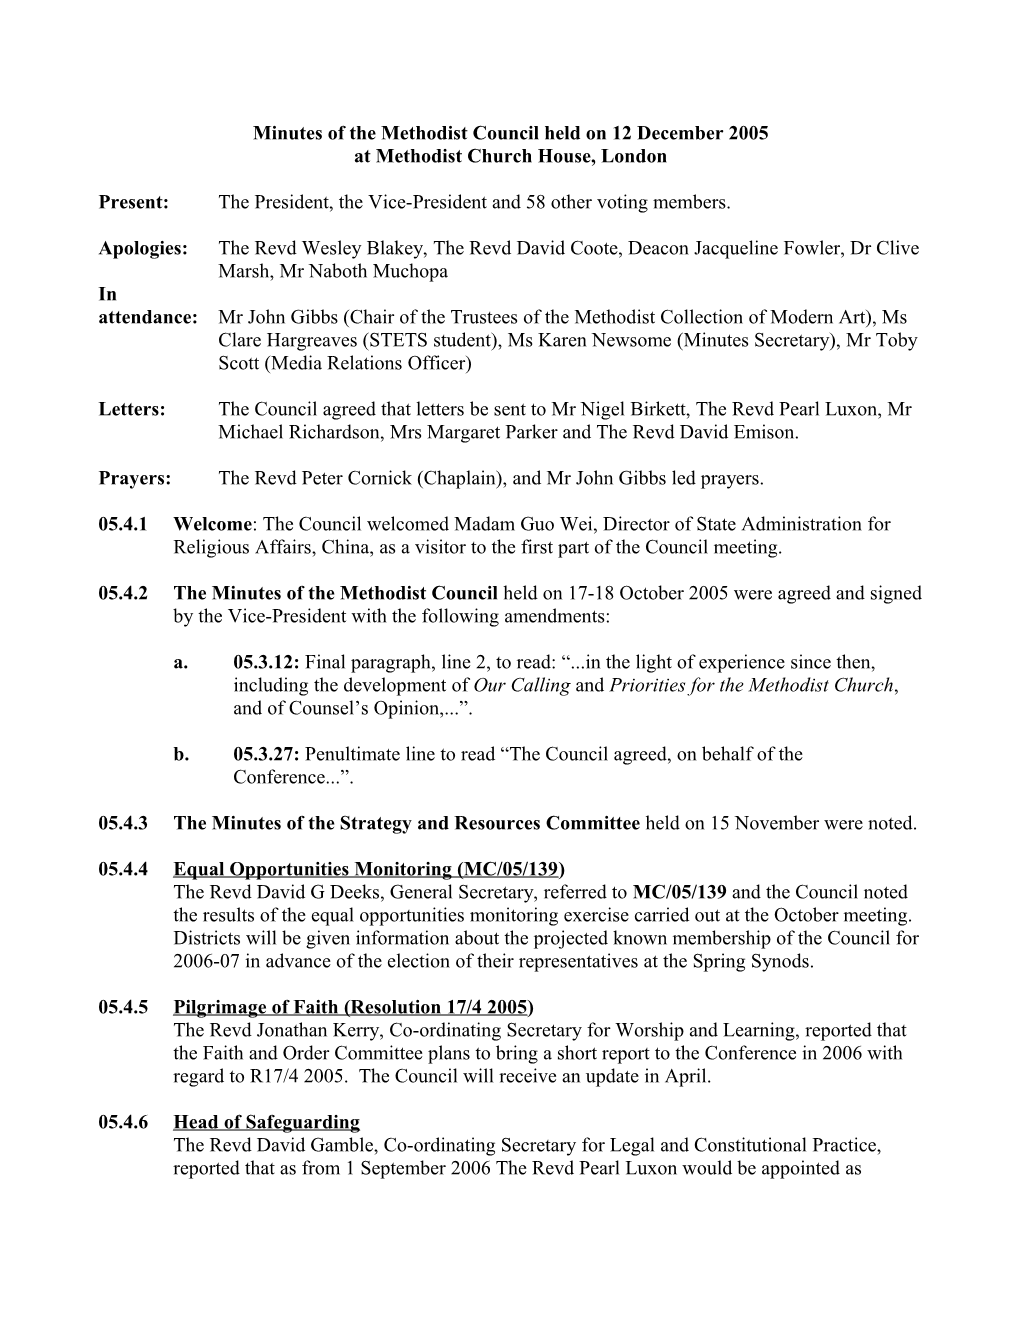 Minutes of the Methodist Council Held on 12 December 2005